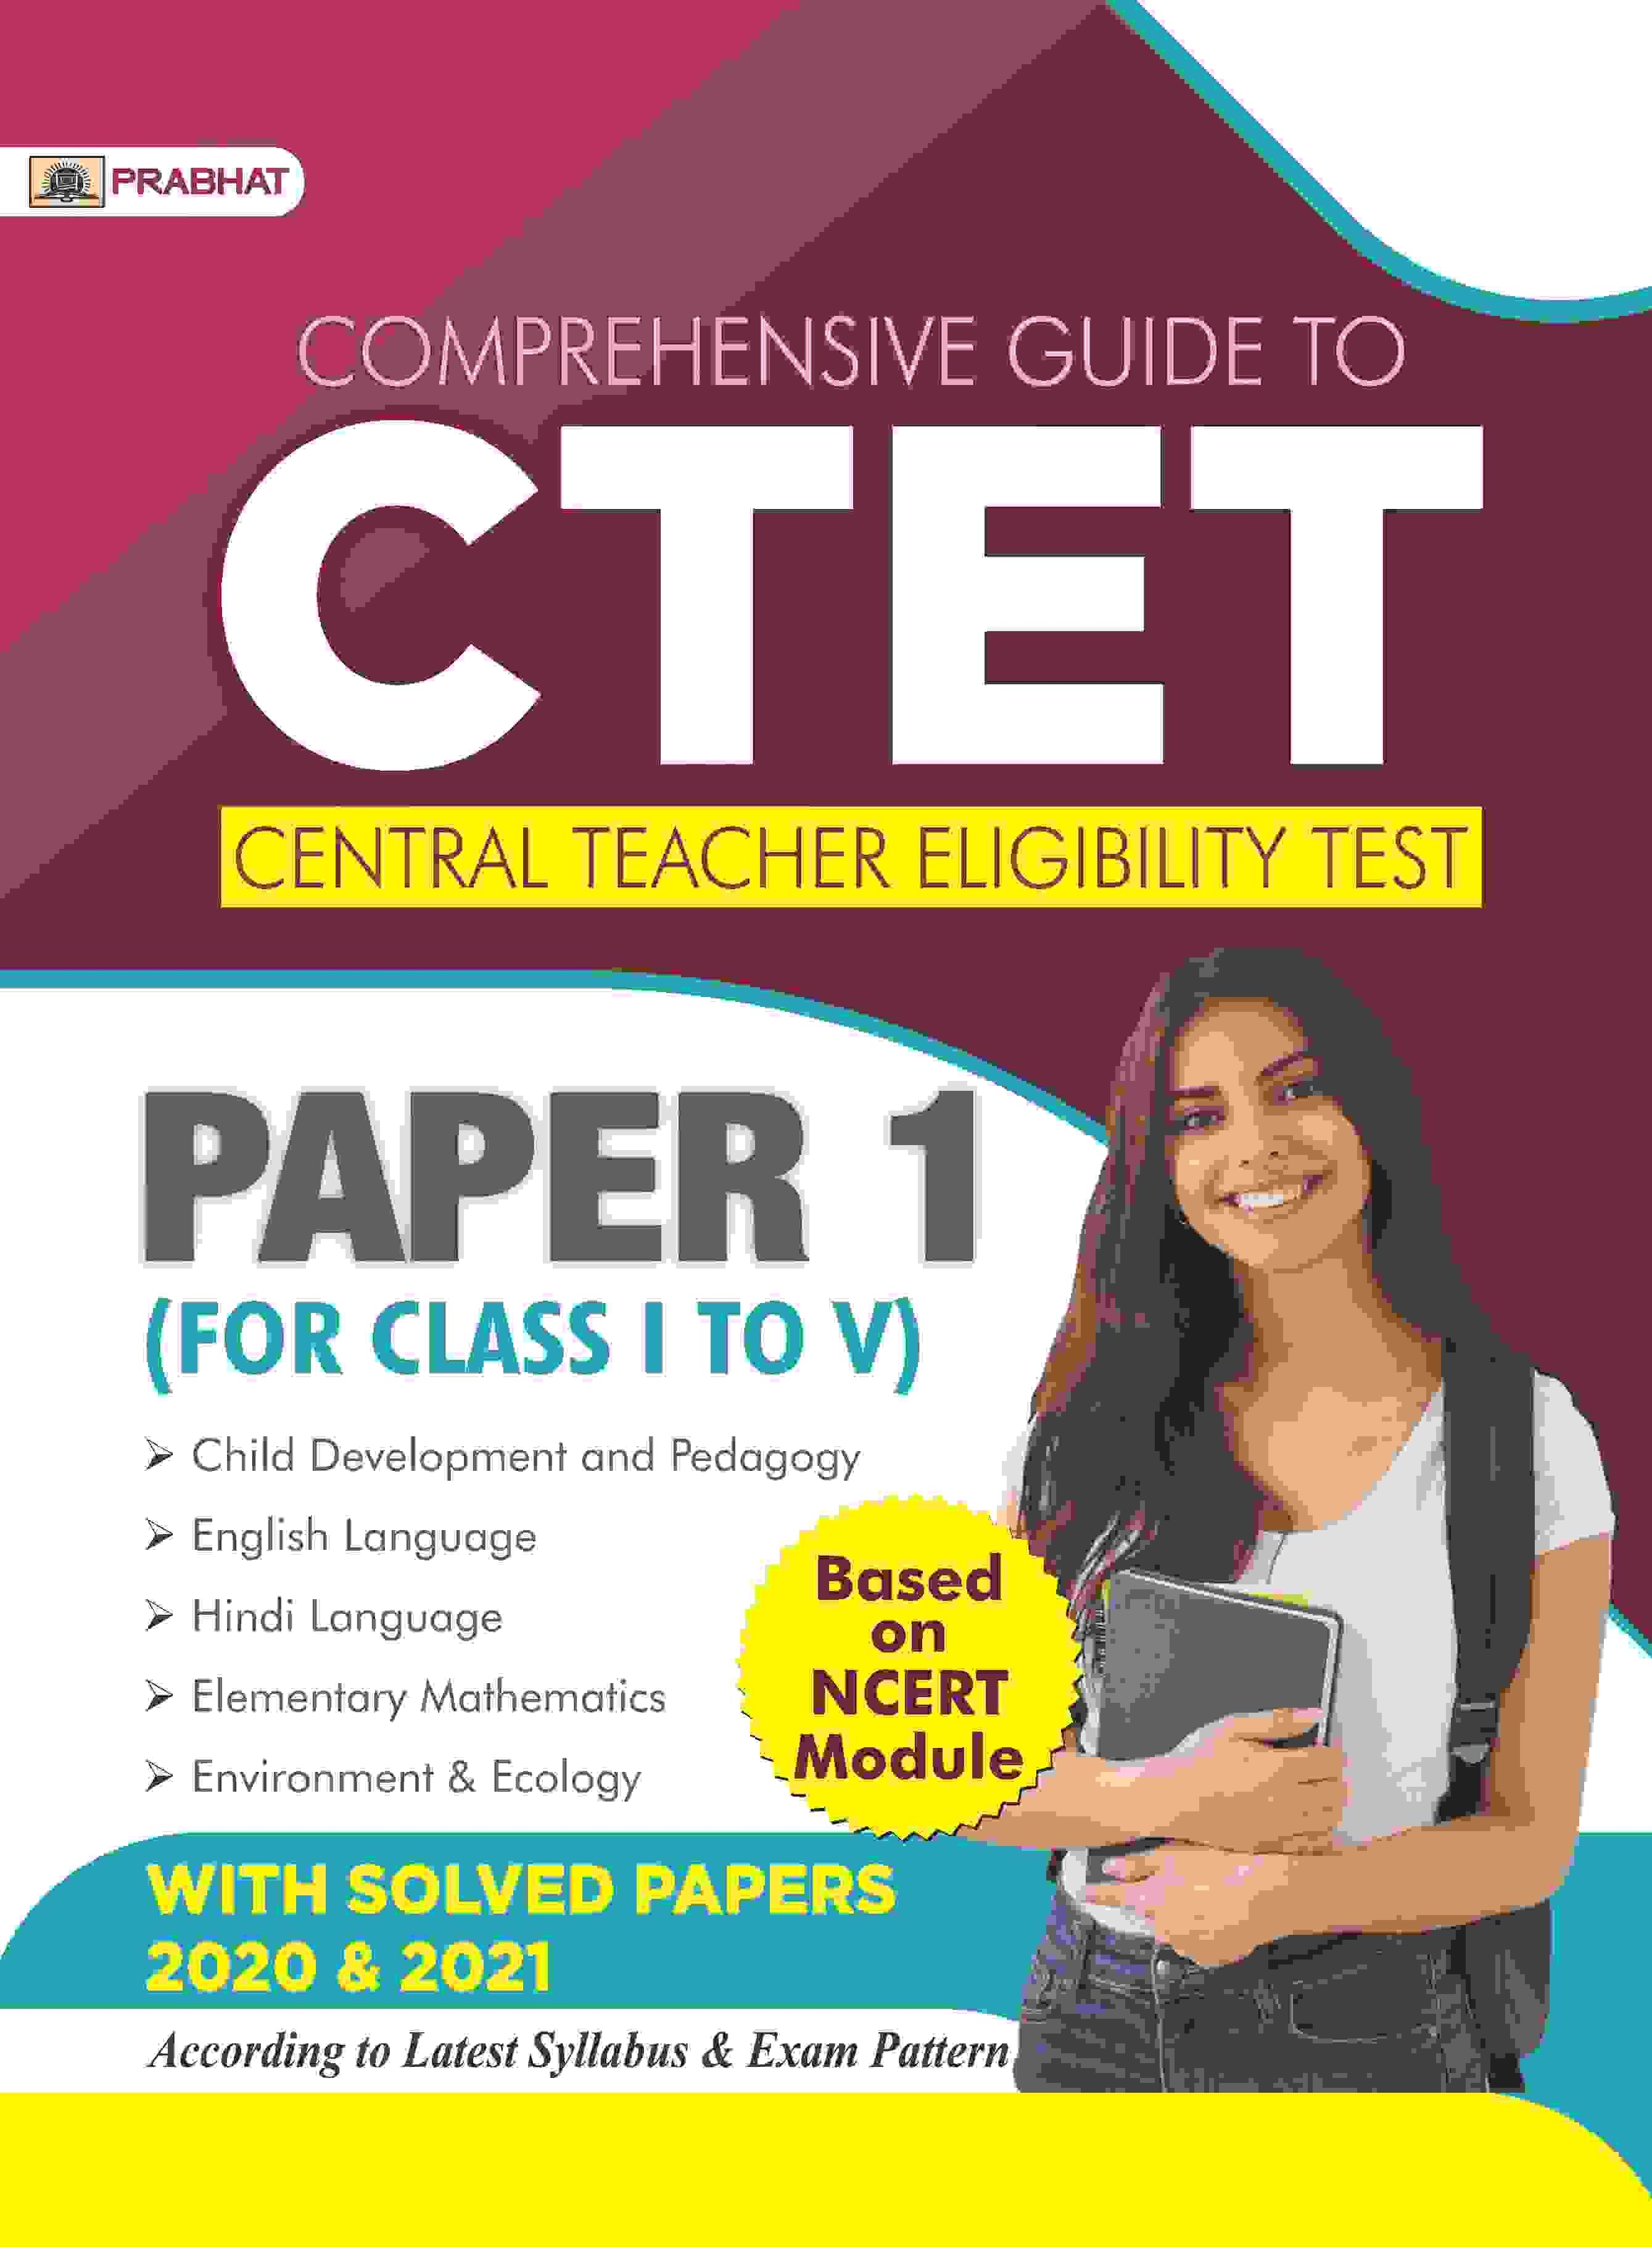 Comprehensive Guide To CTET Central Teacher Eligibility Test Paper-1 (CTET Guide Paper 1 Class: I-V) 